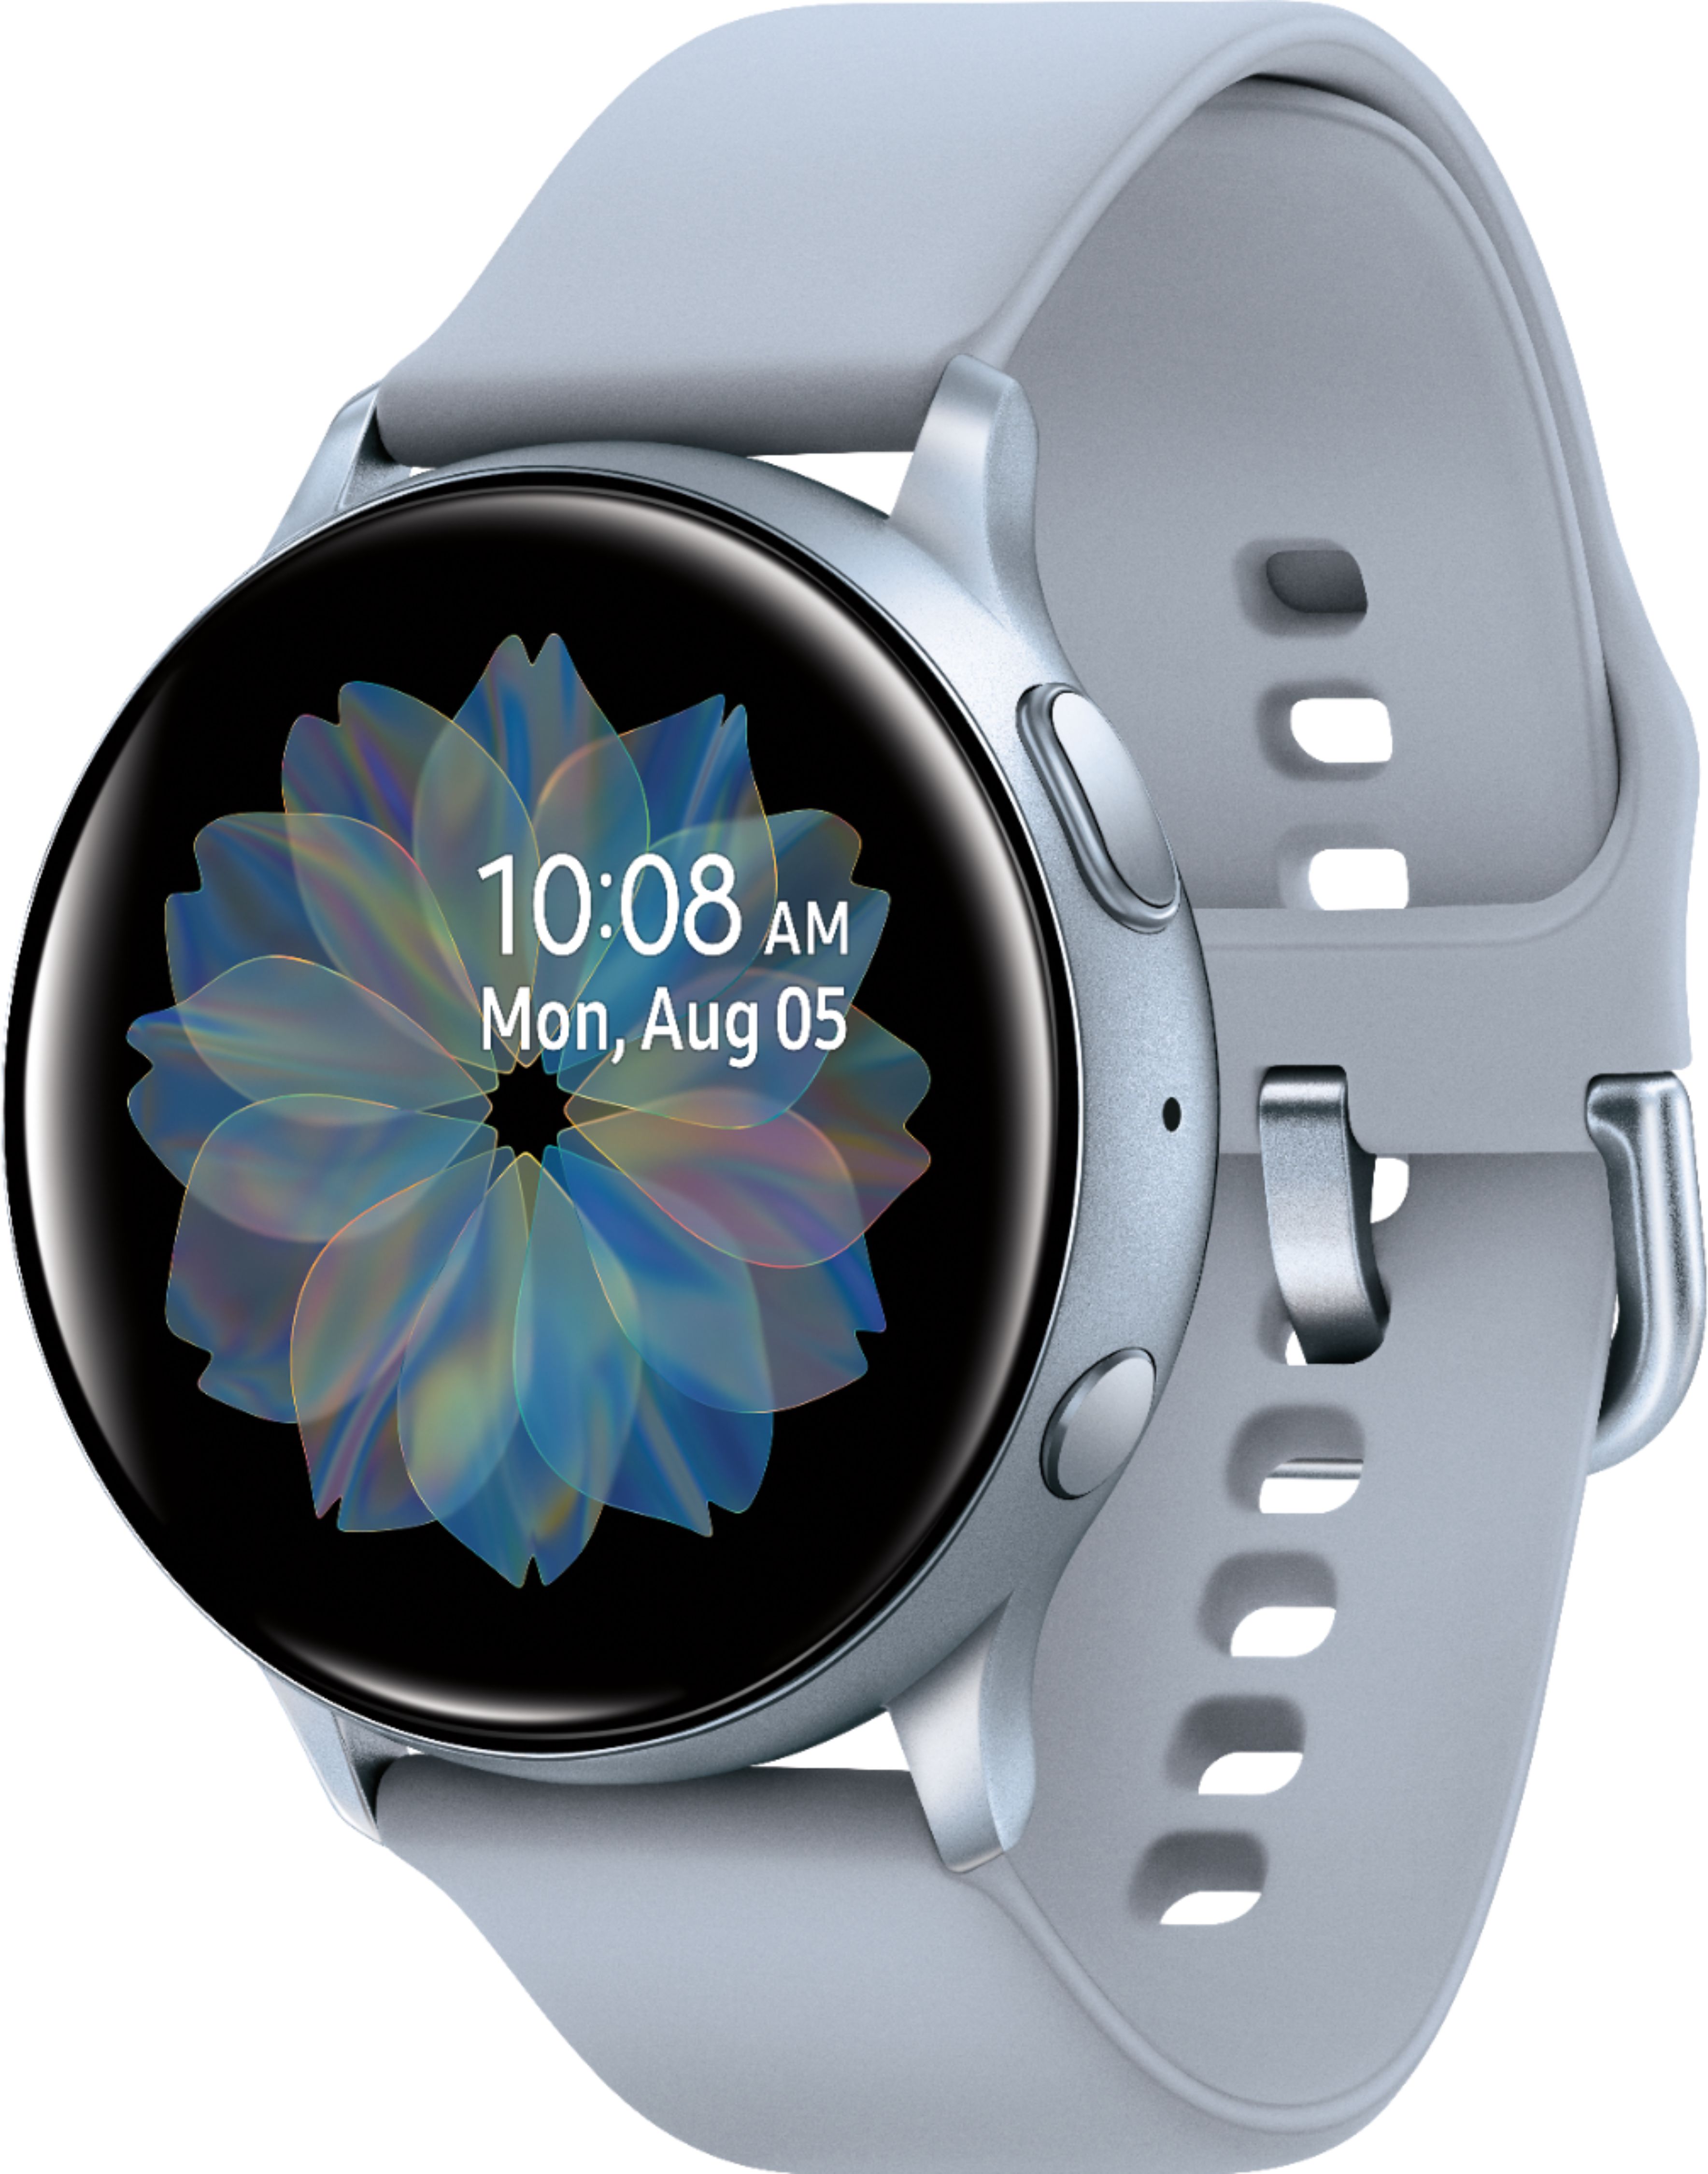 Left View: Samsung - Geek Squad Certified Refurbished Galaxy Watch Active2 Smartwatch 40mm Aluminum - Cloud Silver